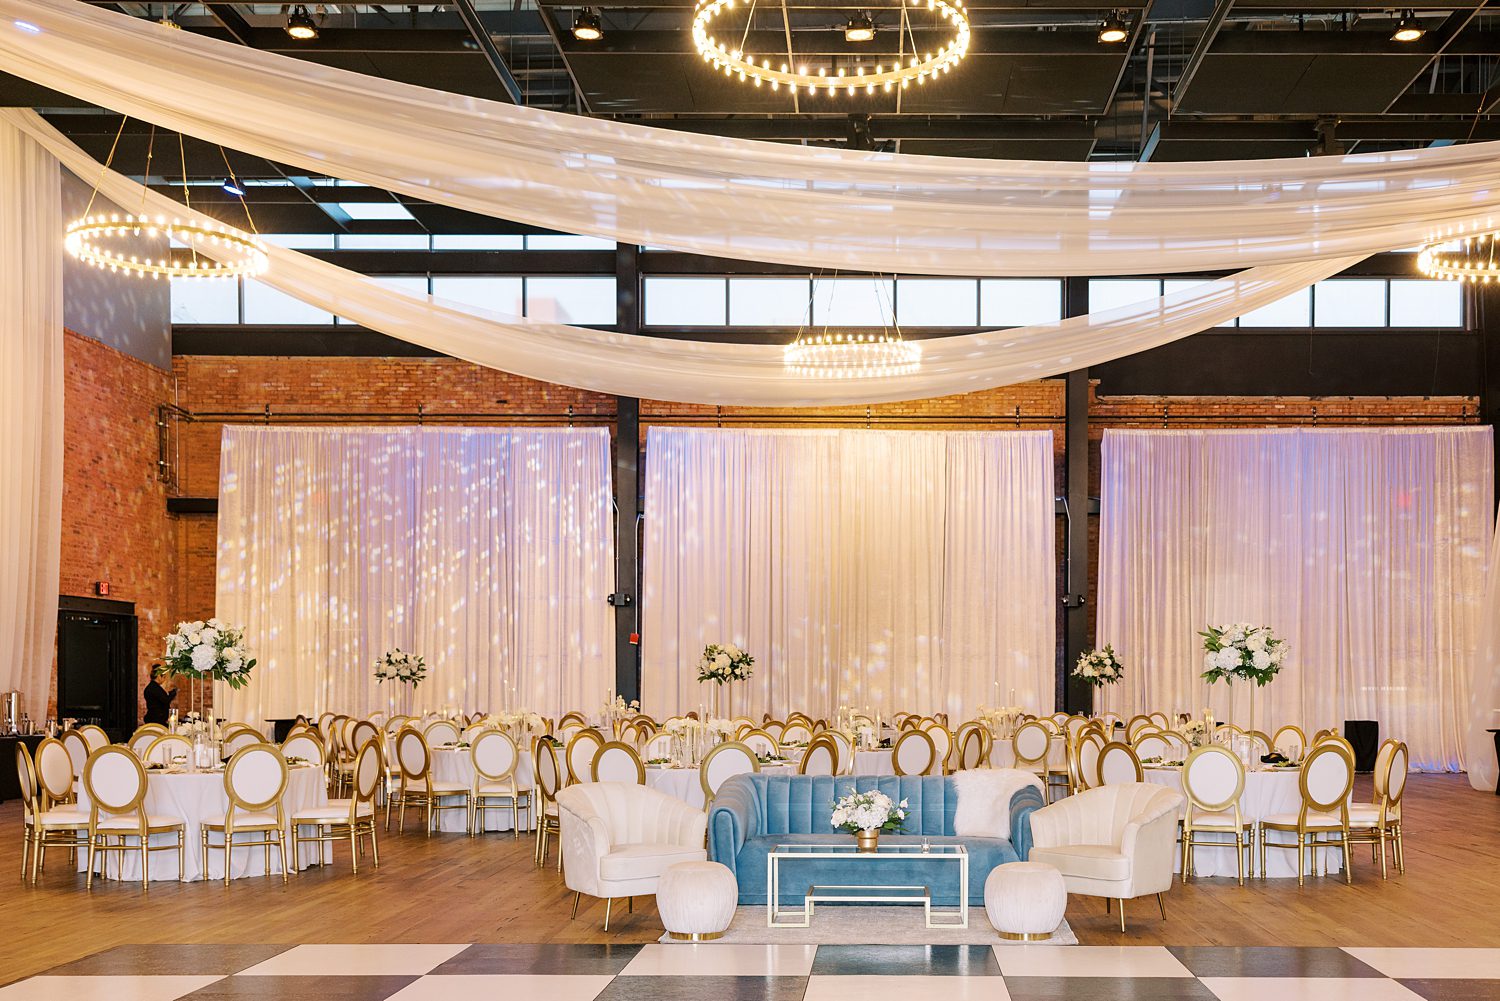 Armature Works wedding reception in Tampa FL with blue and white accents